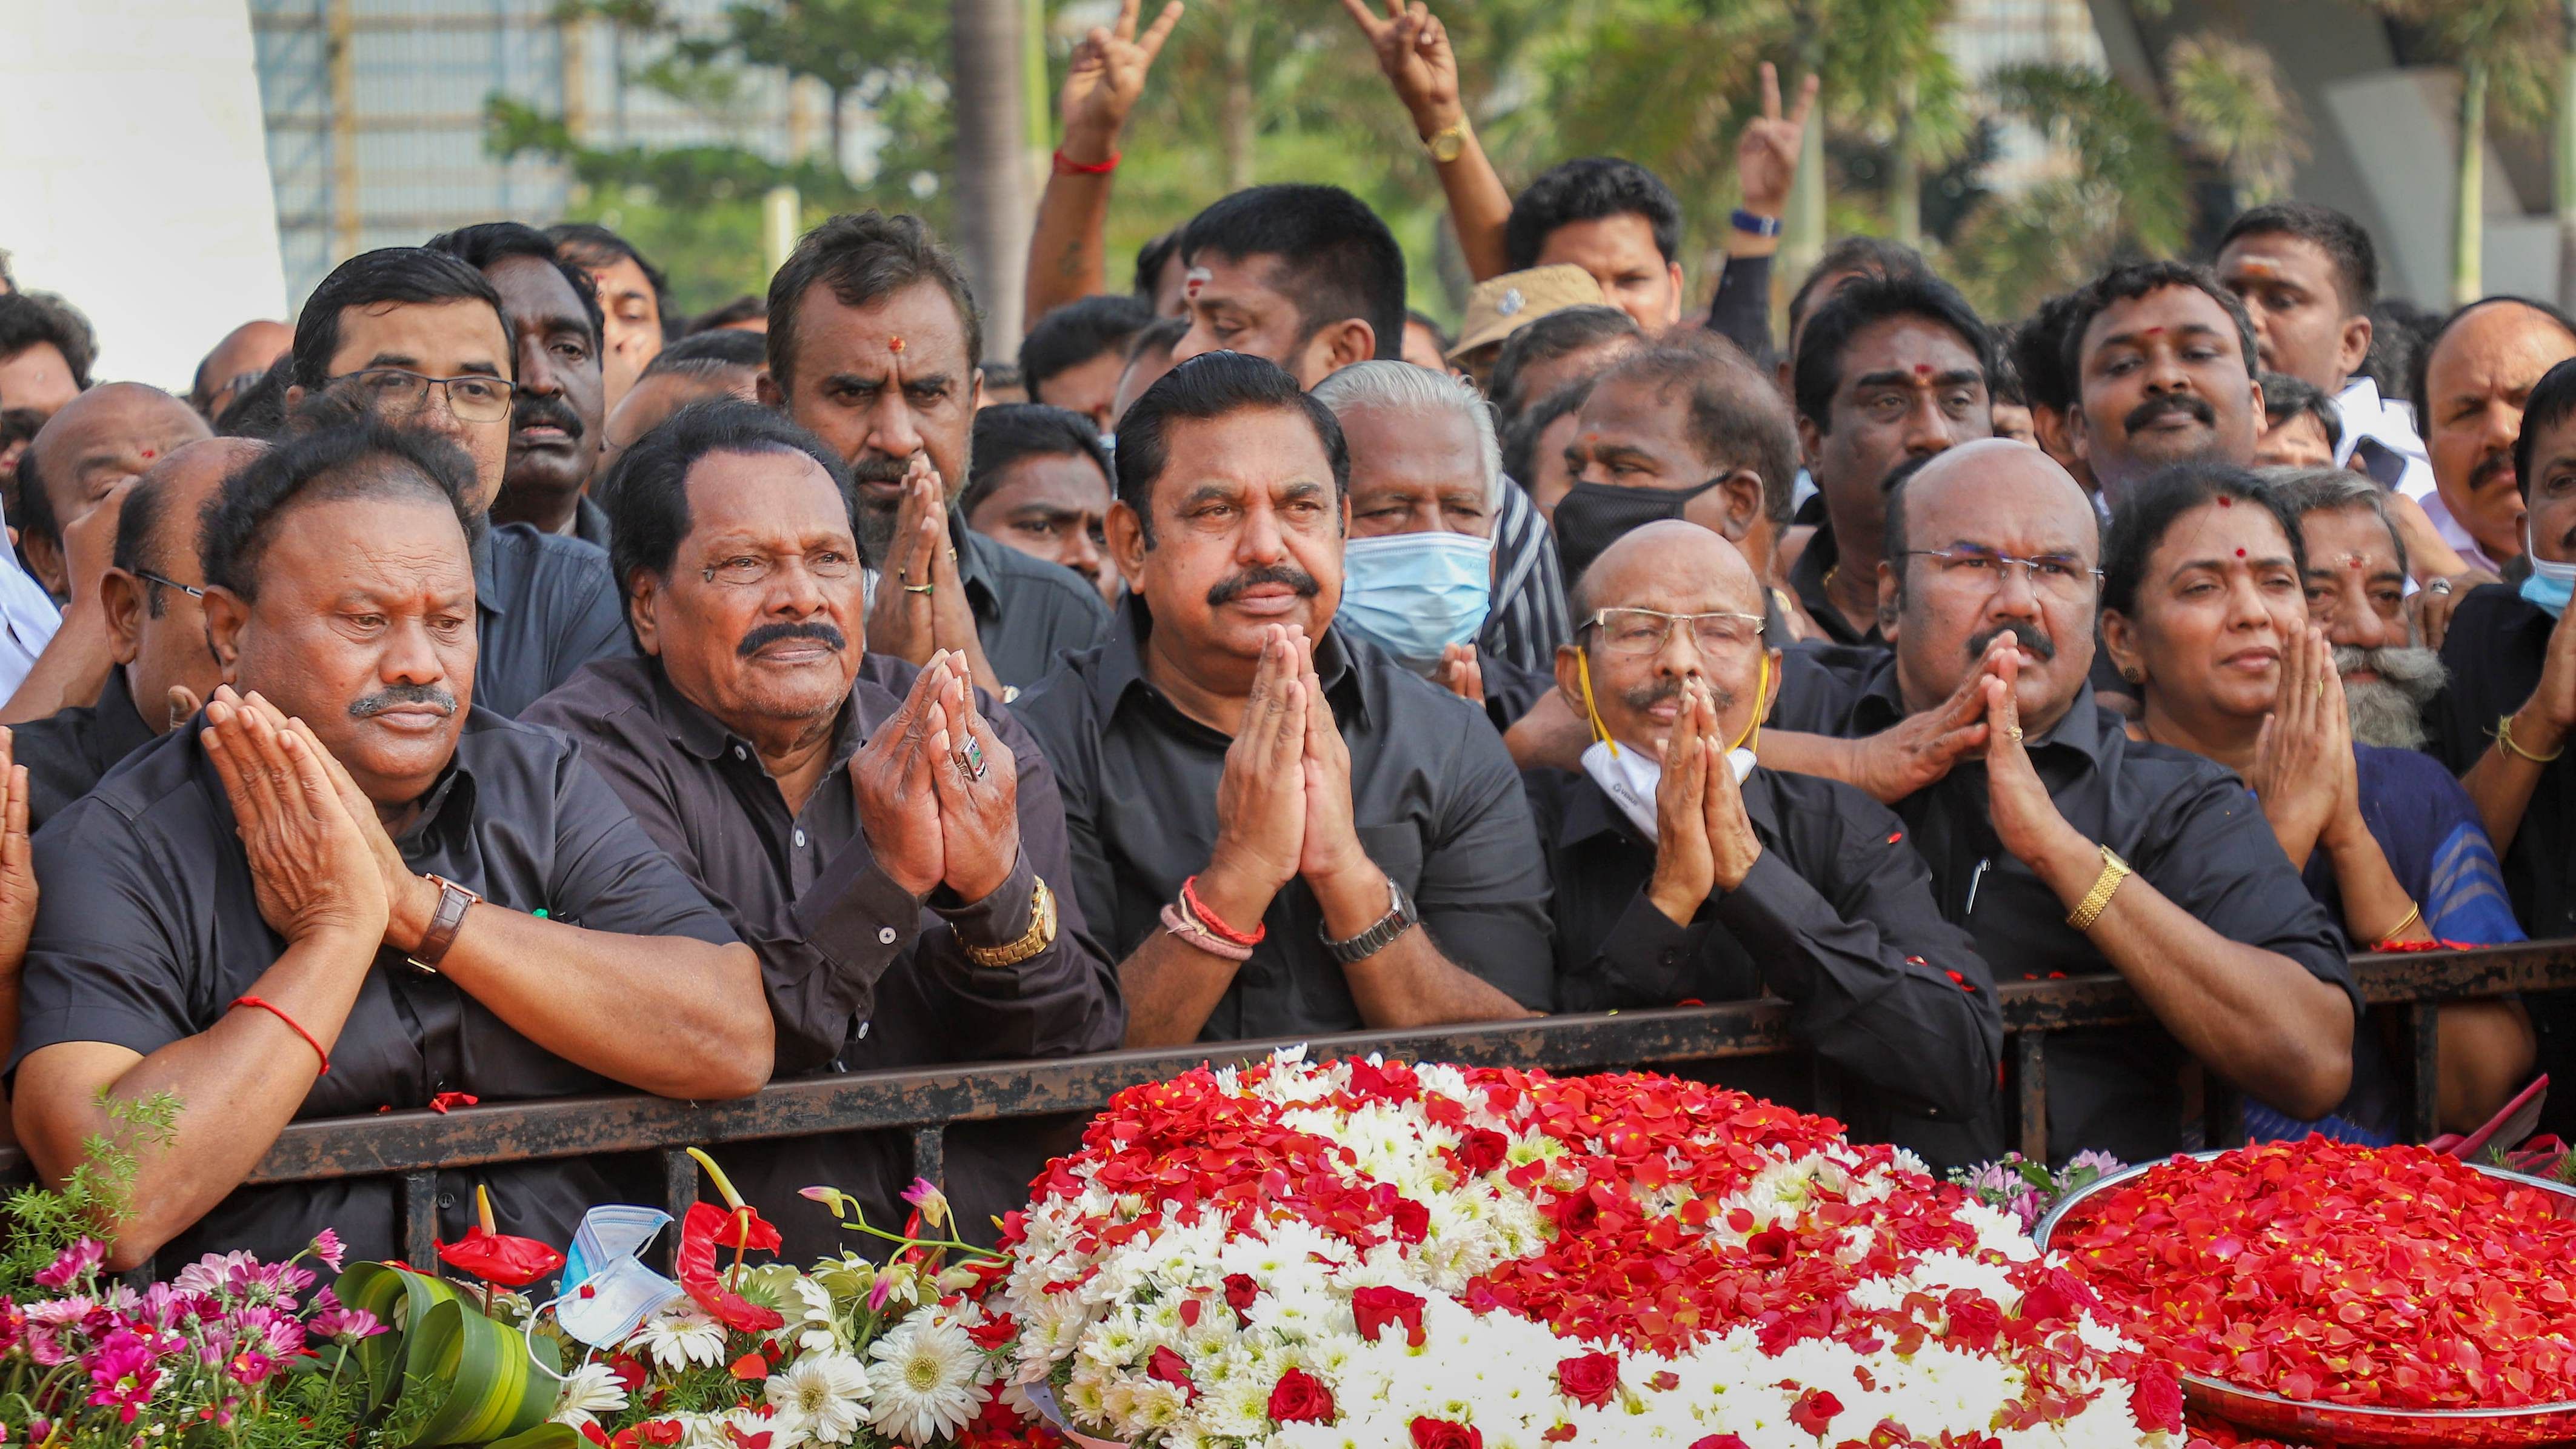  AIADMK leader Edappadi K Palaniswami with party leaders and supporters pays floral tributes to former chief minister and party founder MG Ramachandran on his death anniversary. Credit: PTI Photo